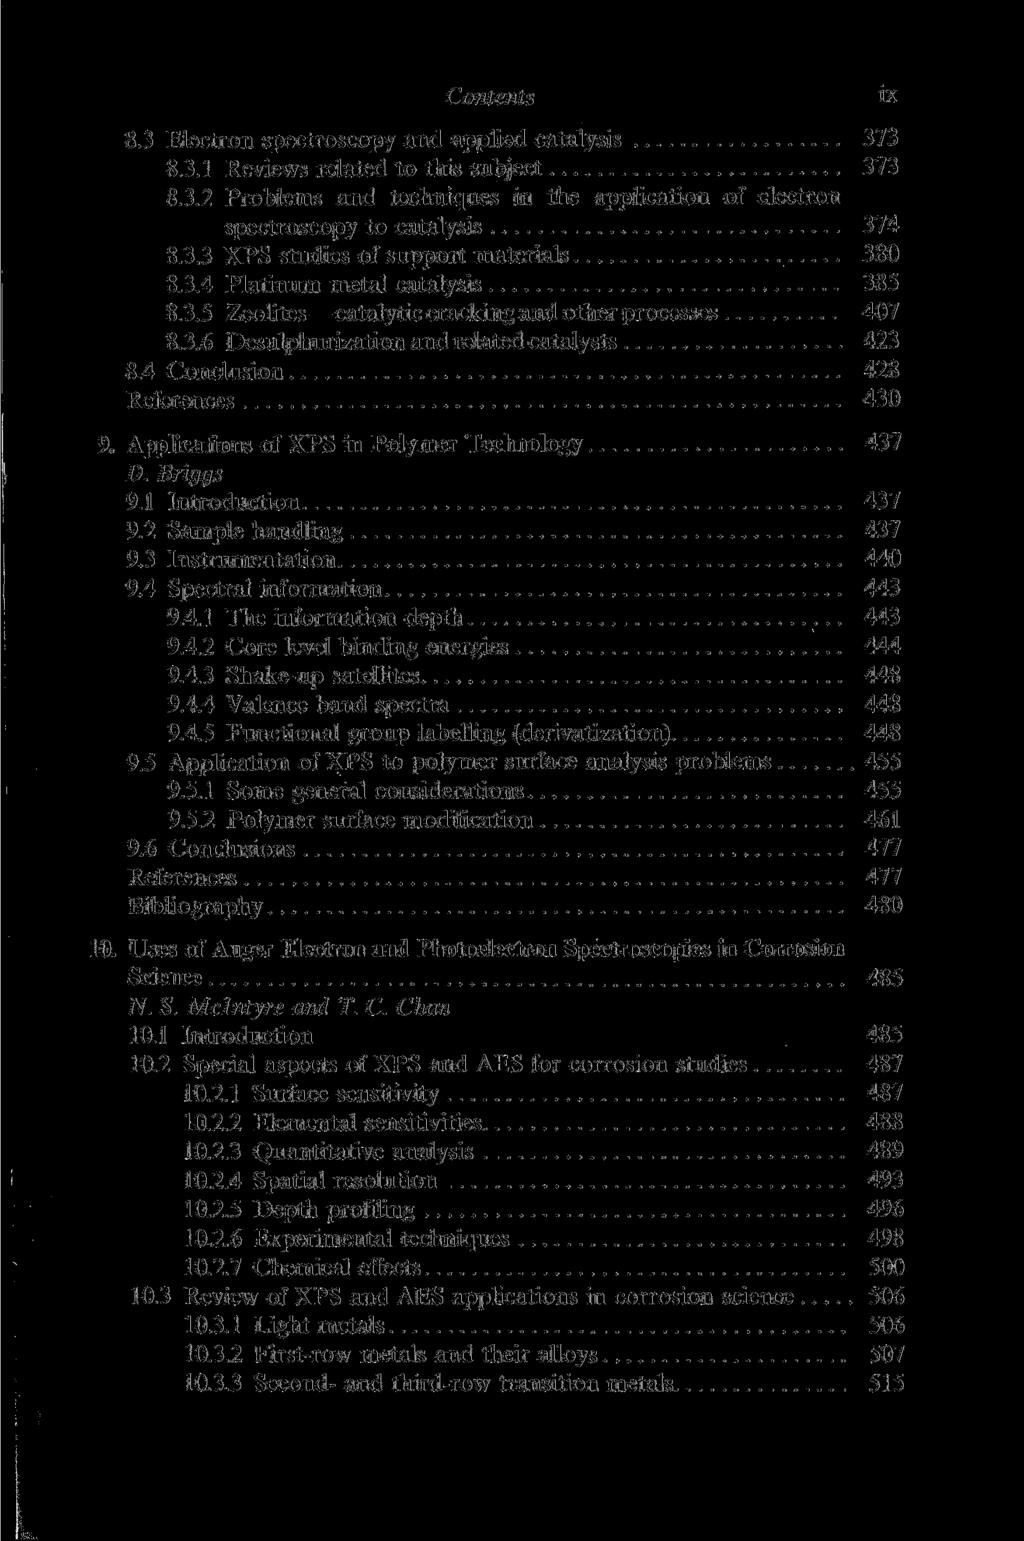 Contents 8.3 Electron spectroscopy and applied catalysis 373 8.3.1 Reviews related to this subject 373 8.3.2 Problems and techniques in the application of electron spectroscopy to catalysis 374 8.3.3 XPS studies of support materials 380 8.